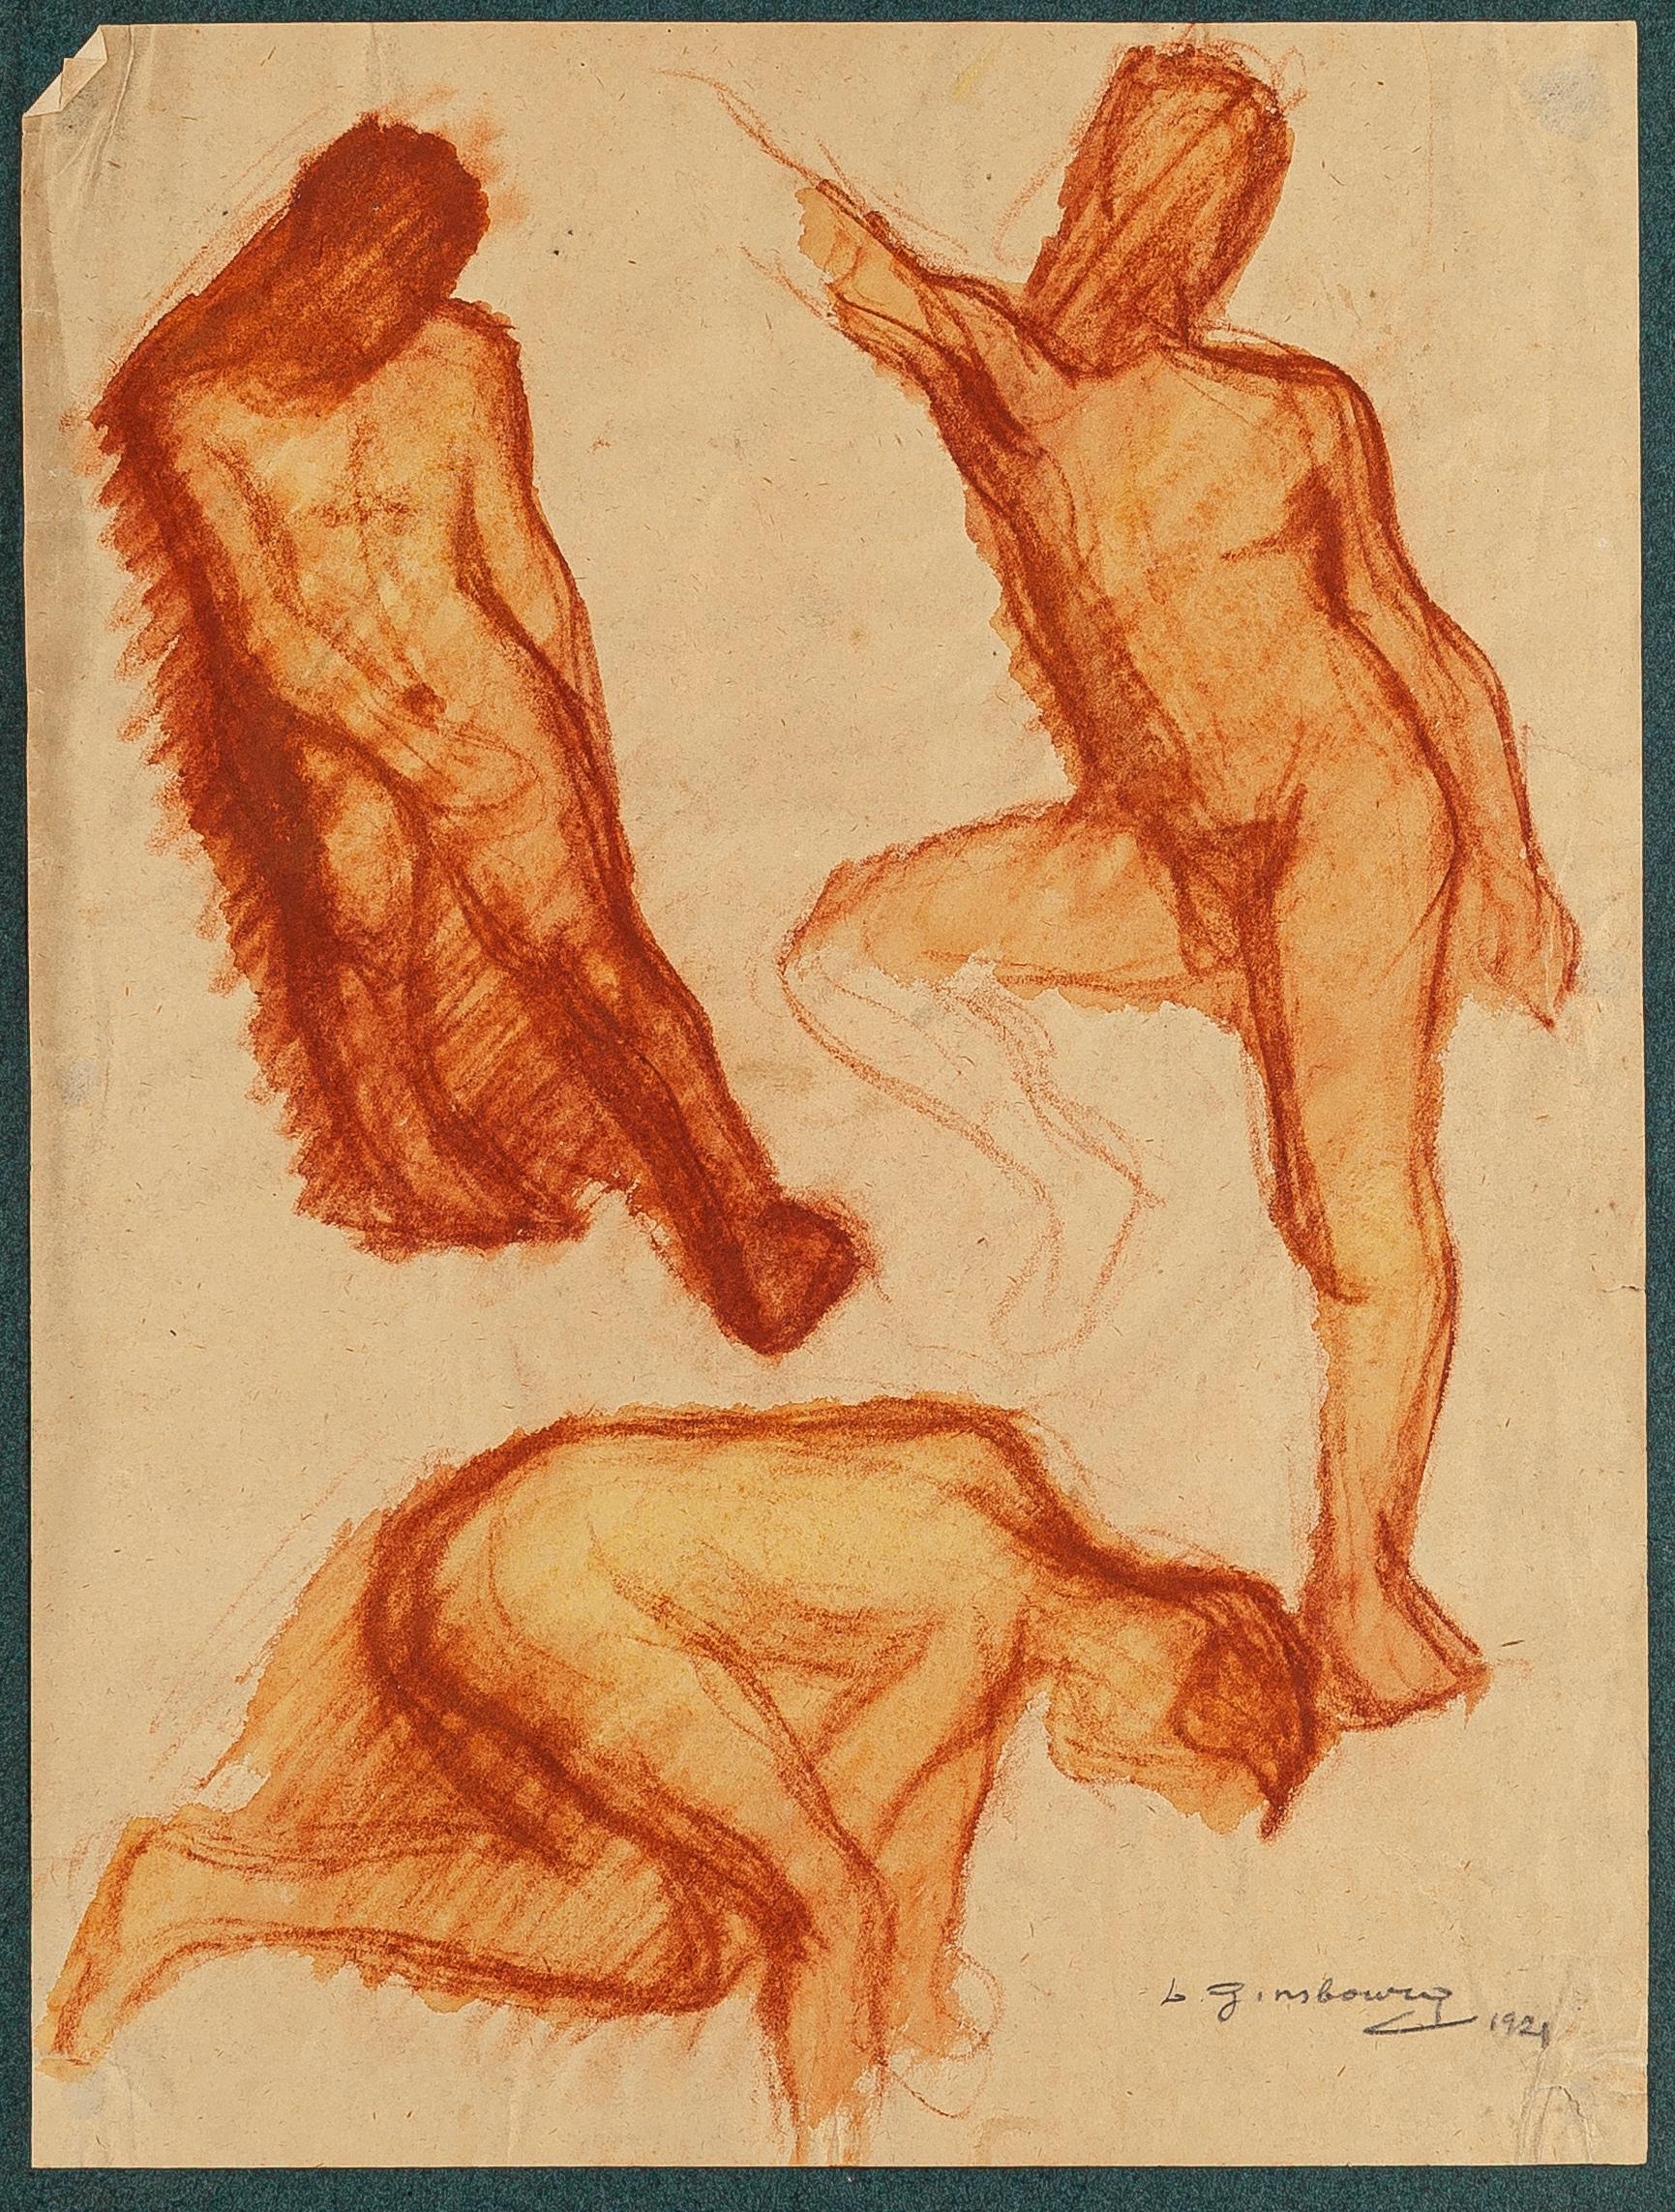 Male Nudes - Original Drawing on Paper by D. Ginsbourg - 1921 - Art by Daniel Ginsbourg